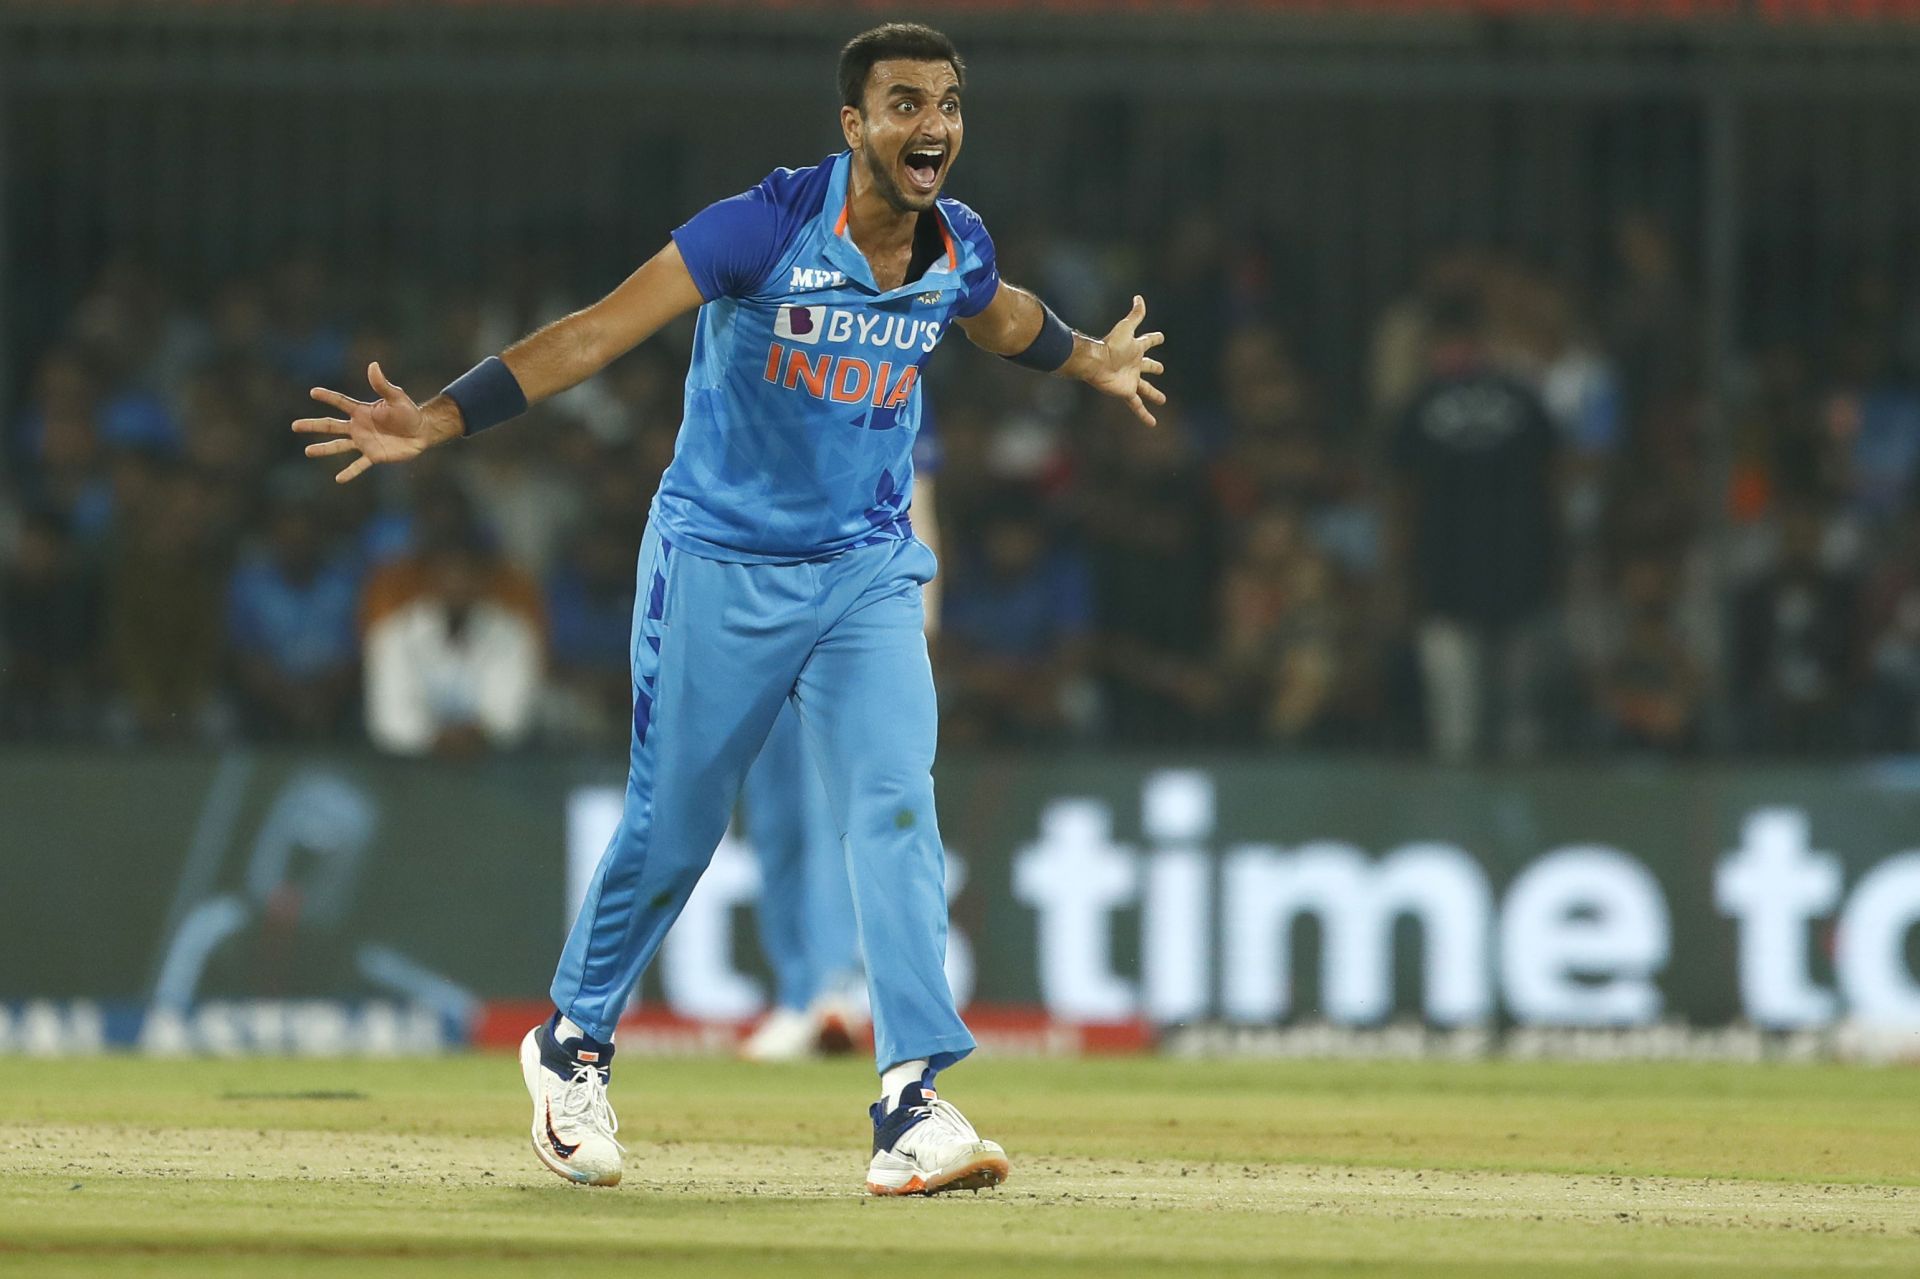 Harshal Patel had a nightmarish time with the ball in the third T20I